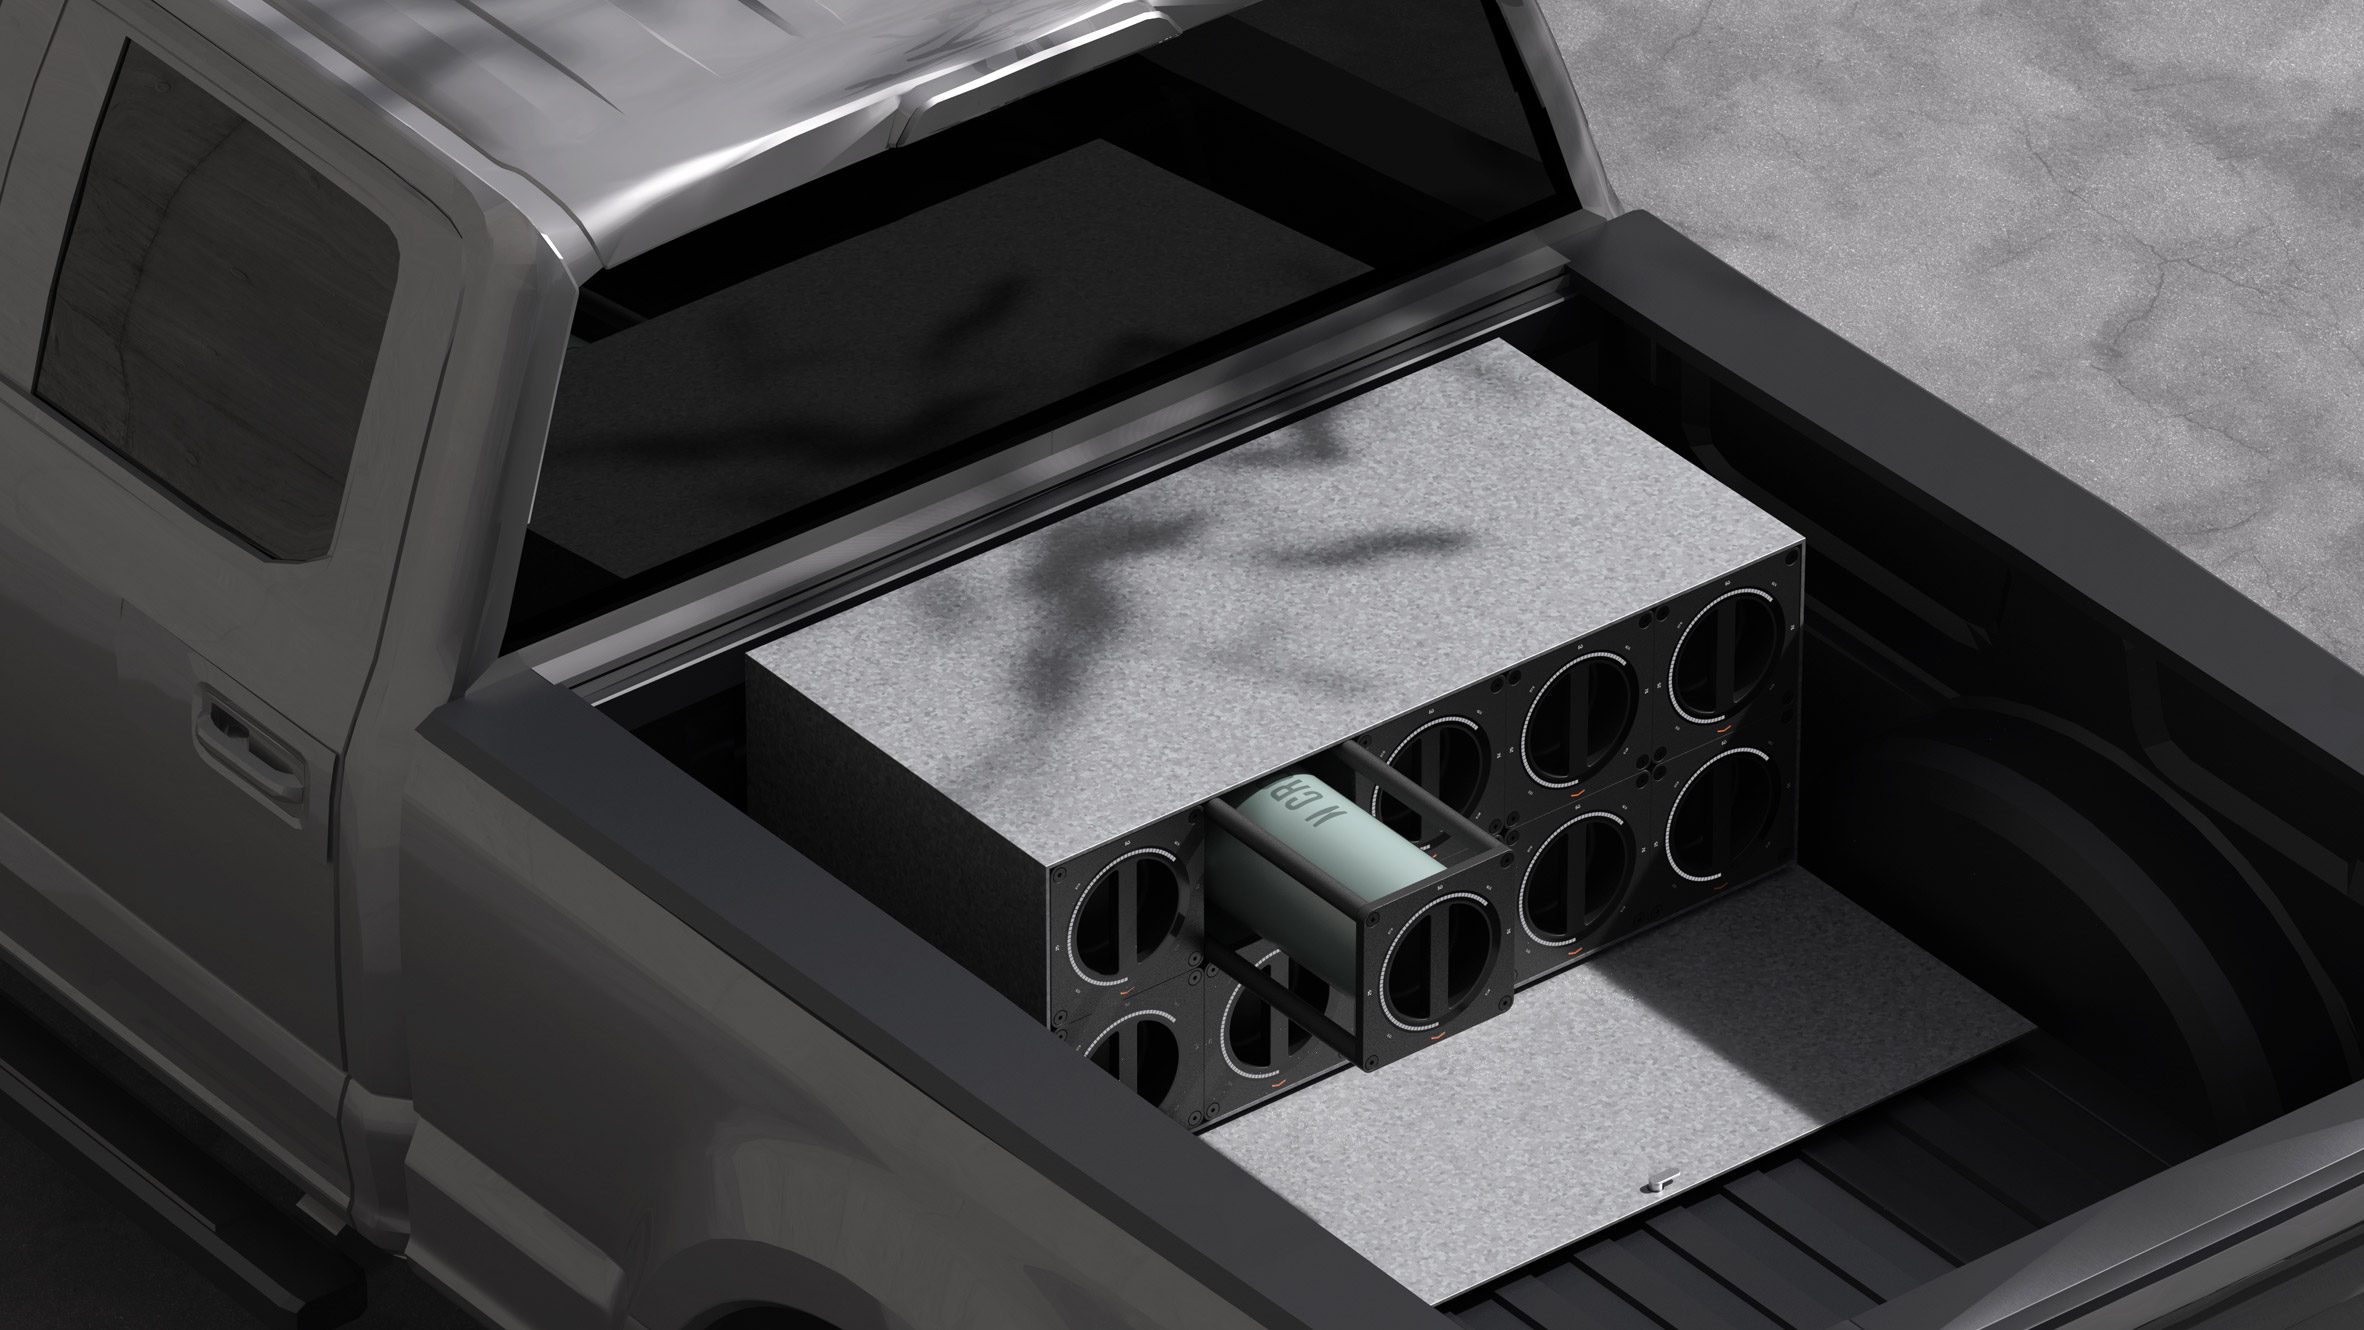 Rendering of the bed of a pick-up truck with modules for holding Croft hydrogen Nanocartridges